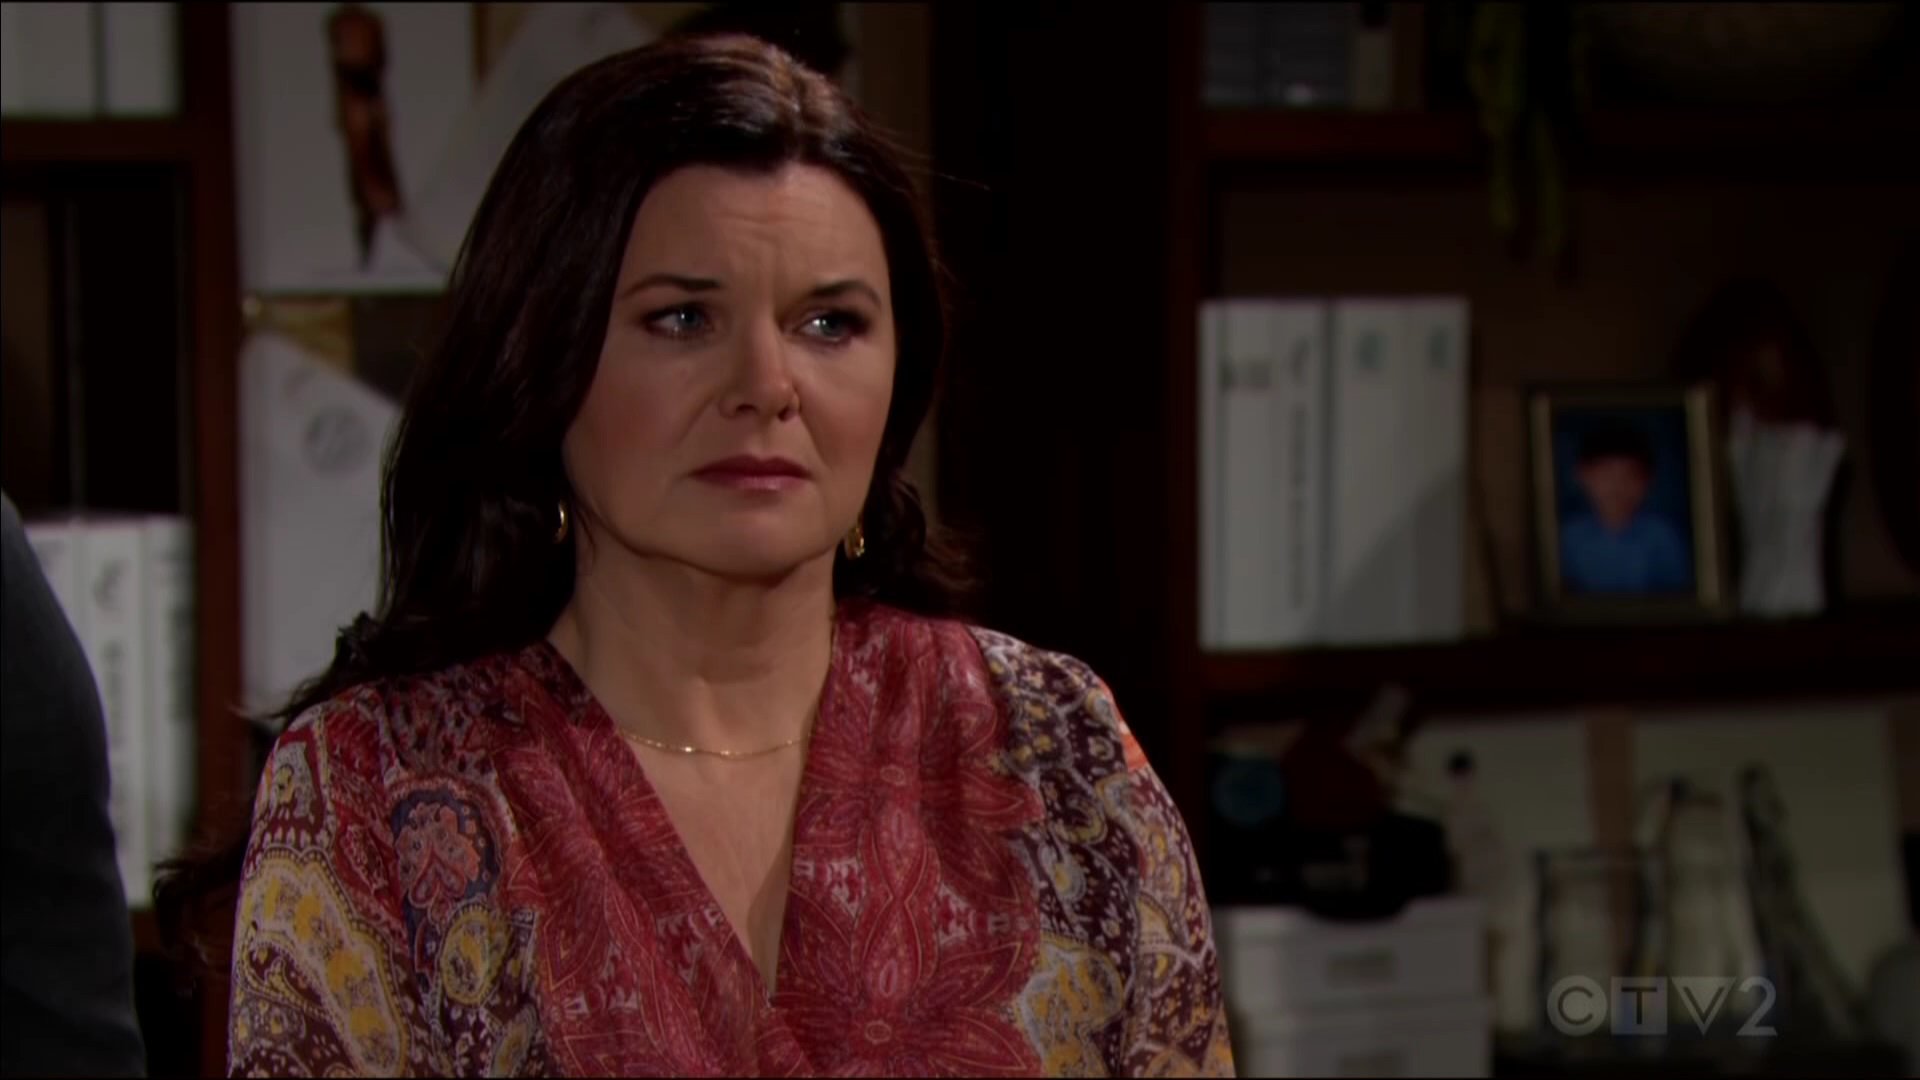 katie listens as bill makes a plea for her to reunite with him